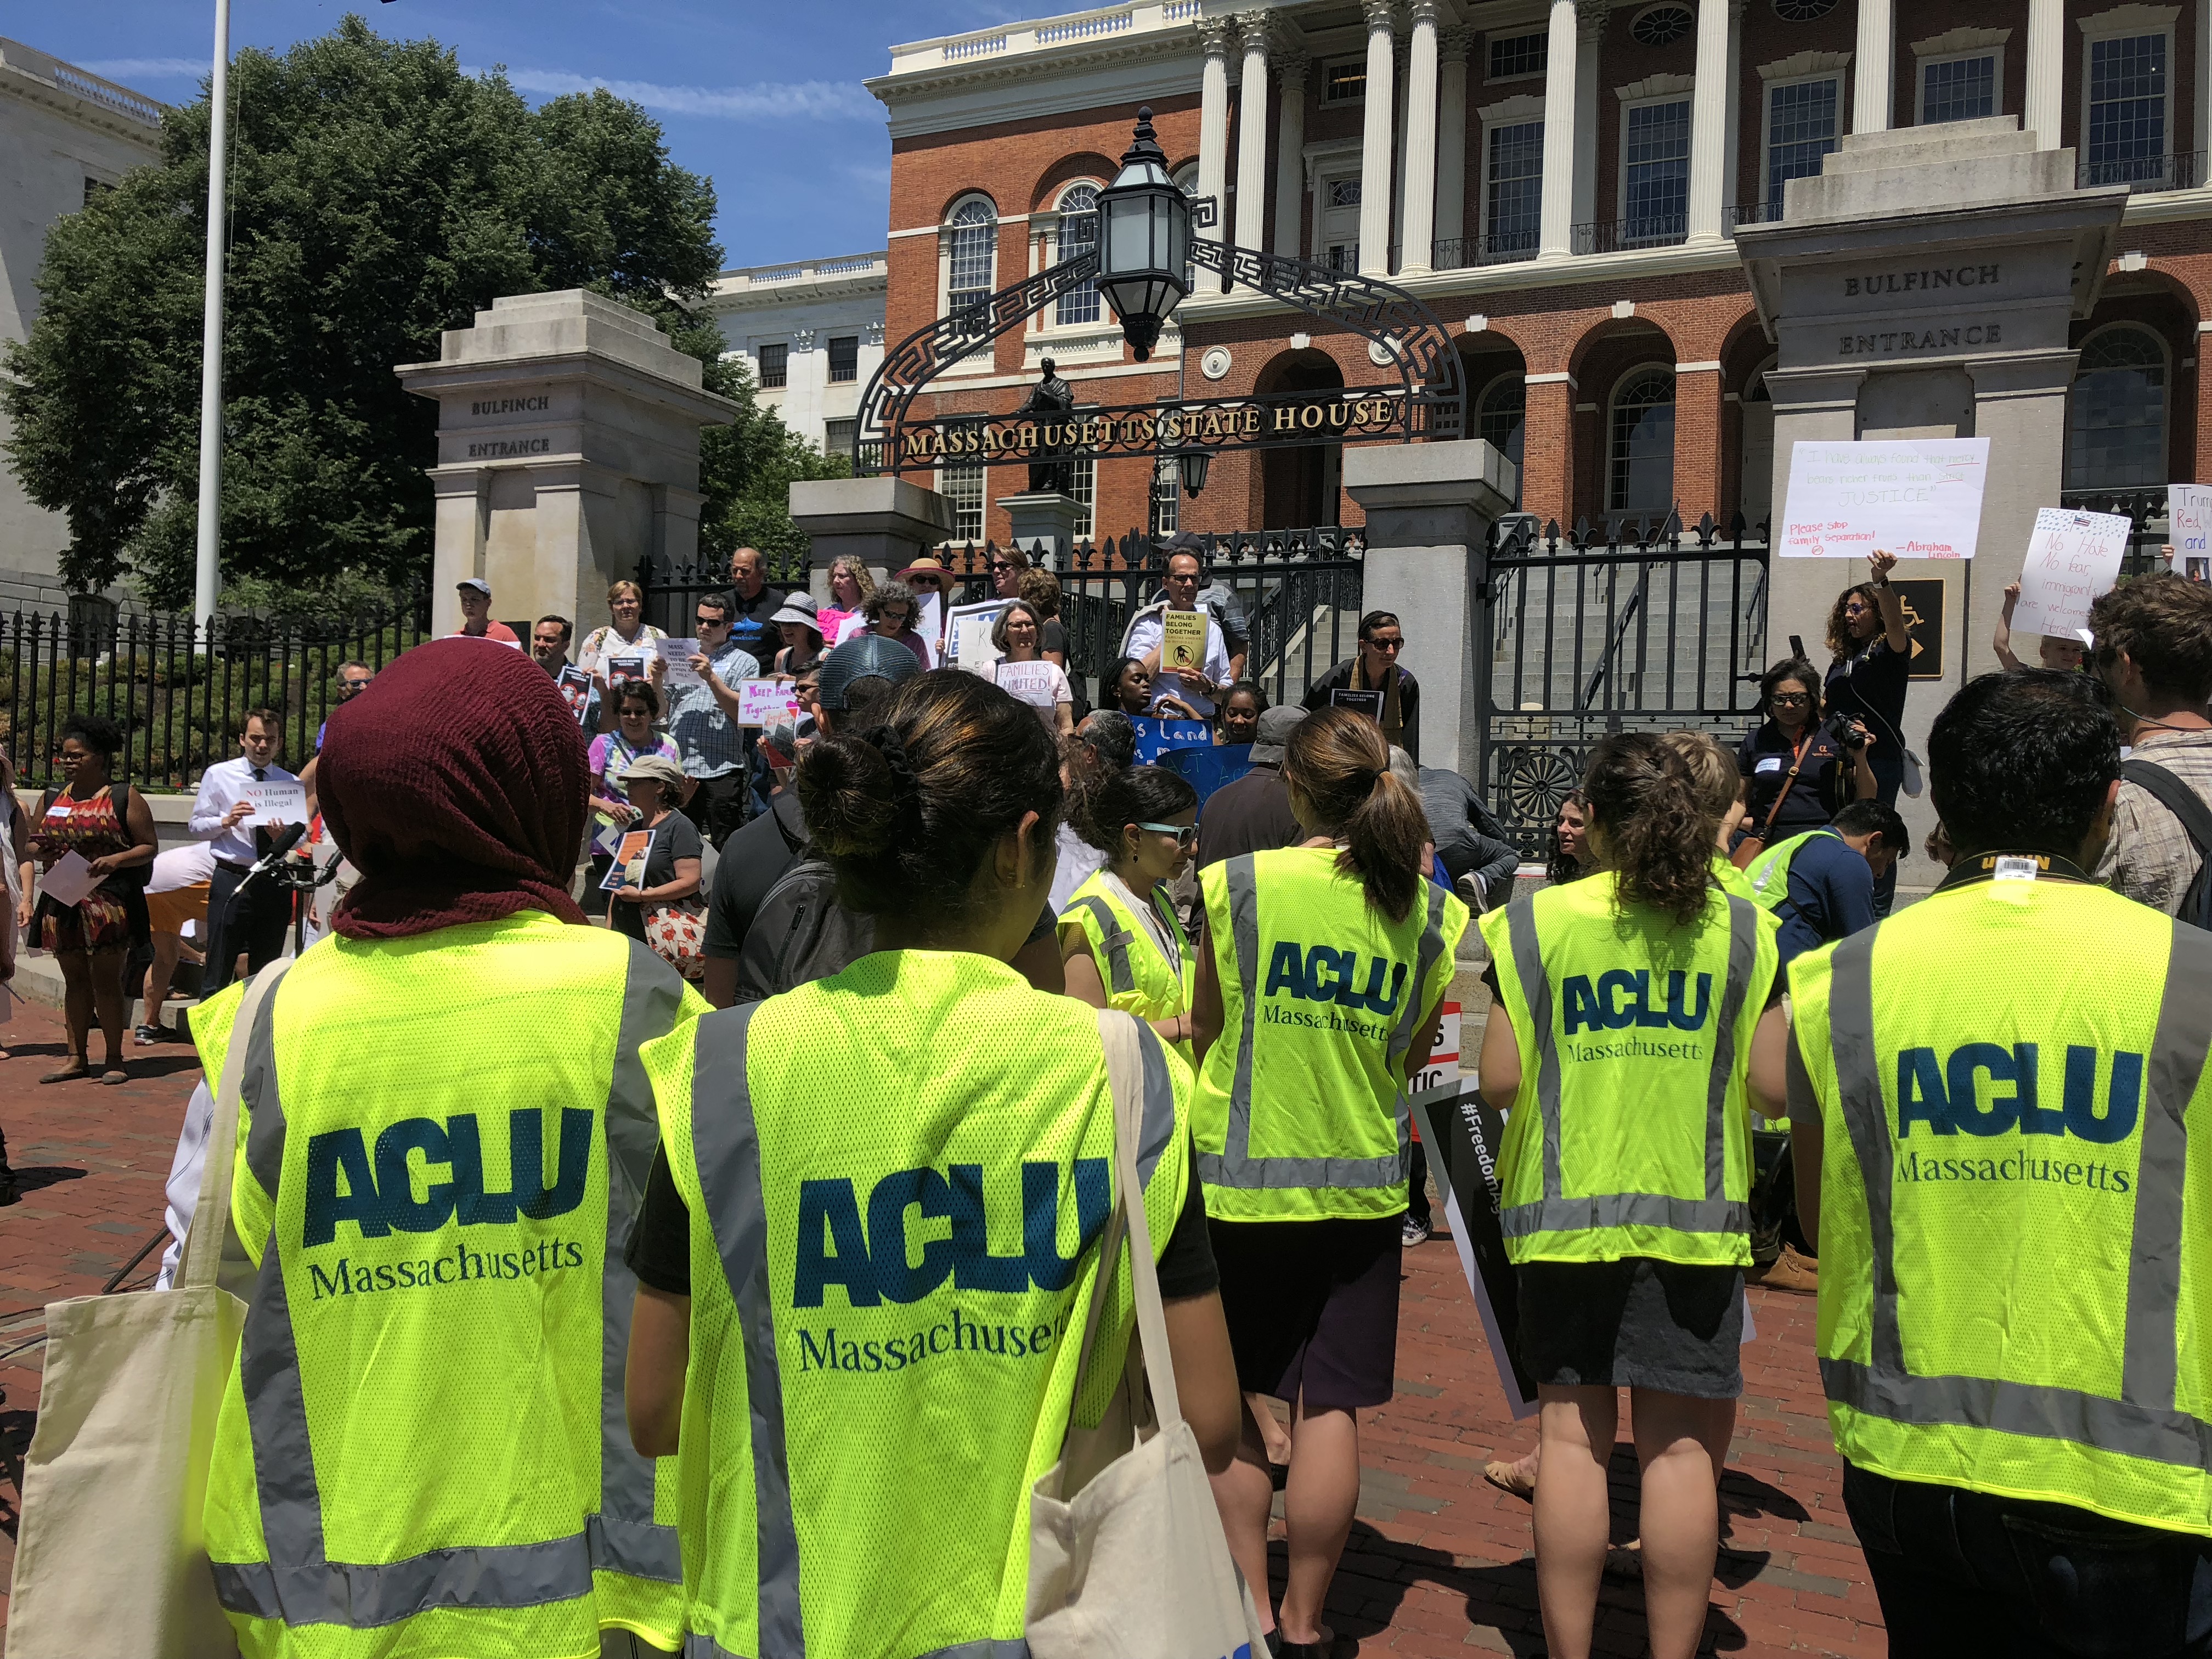 Volunteers wearing bright ACLU vests in front of the Massachusetts State House